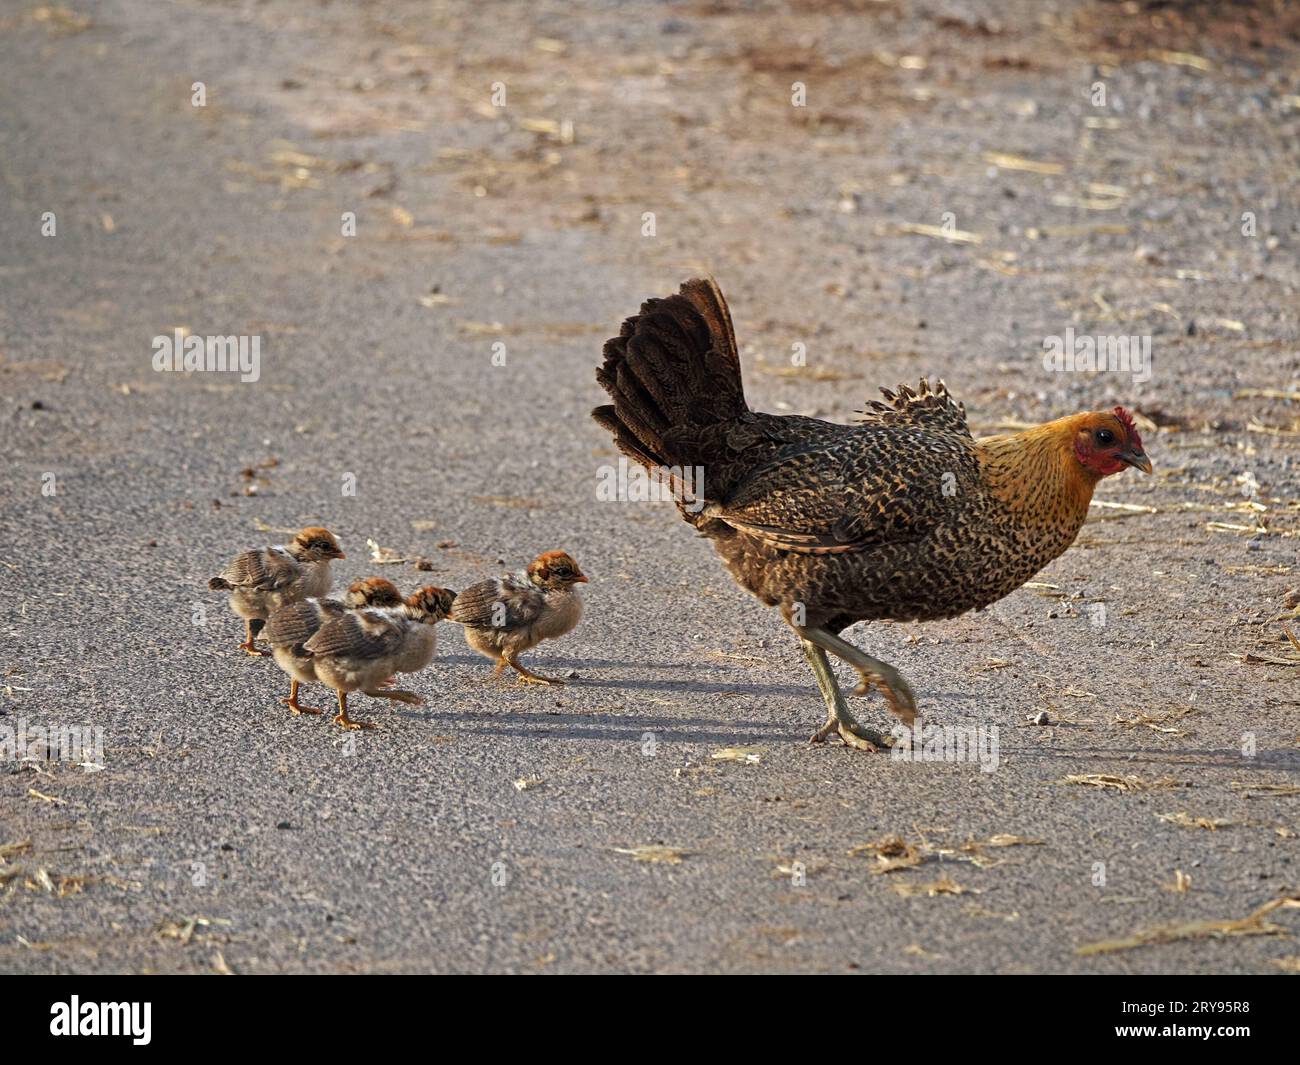 https://c8.alamy.com/comp/2RY95R8/braekel-brackel-or-brakel-mother-hen-a-distinctive-rare-breed-with-brood-of-five-cute-chicks-crossing-surfaced-farmyard-in-cumbria-england-uk-2RY95R8.jpg